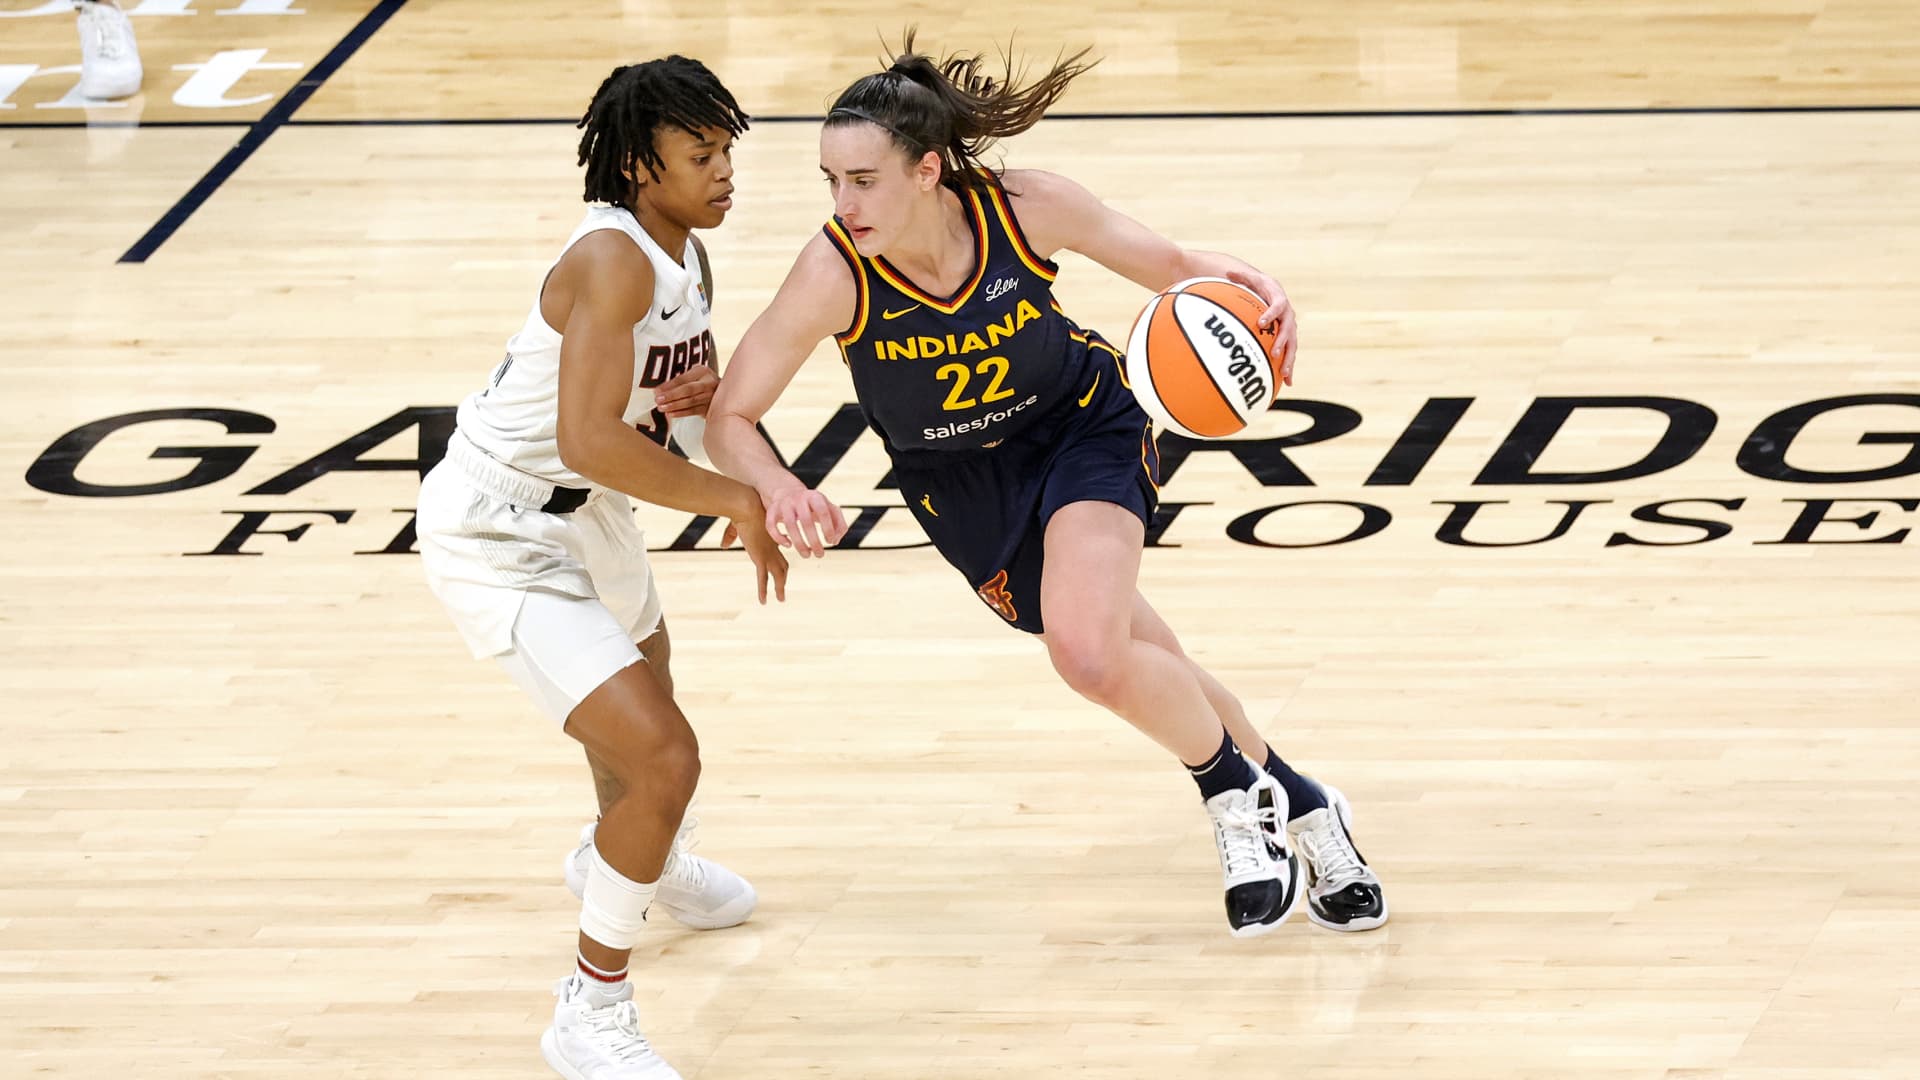 Disney+ to stream Caitlin Clark’s WNBA debut with Indiana Fever